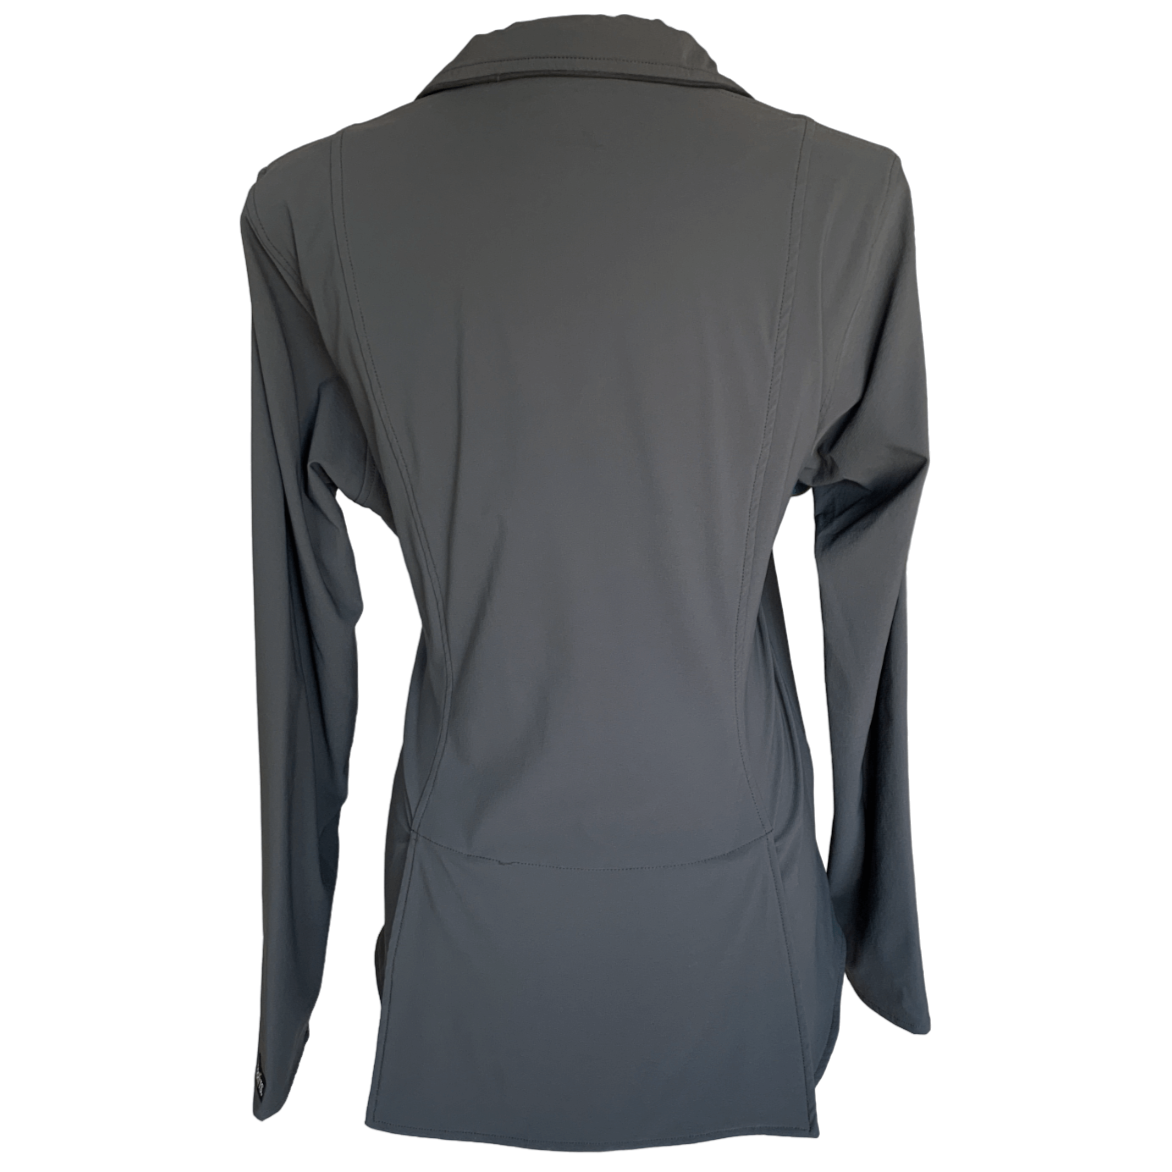 Kerrits 'Stretch Competitor Koat' 4 Snap in Grey - Woman's Large